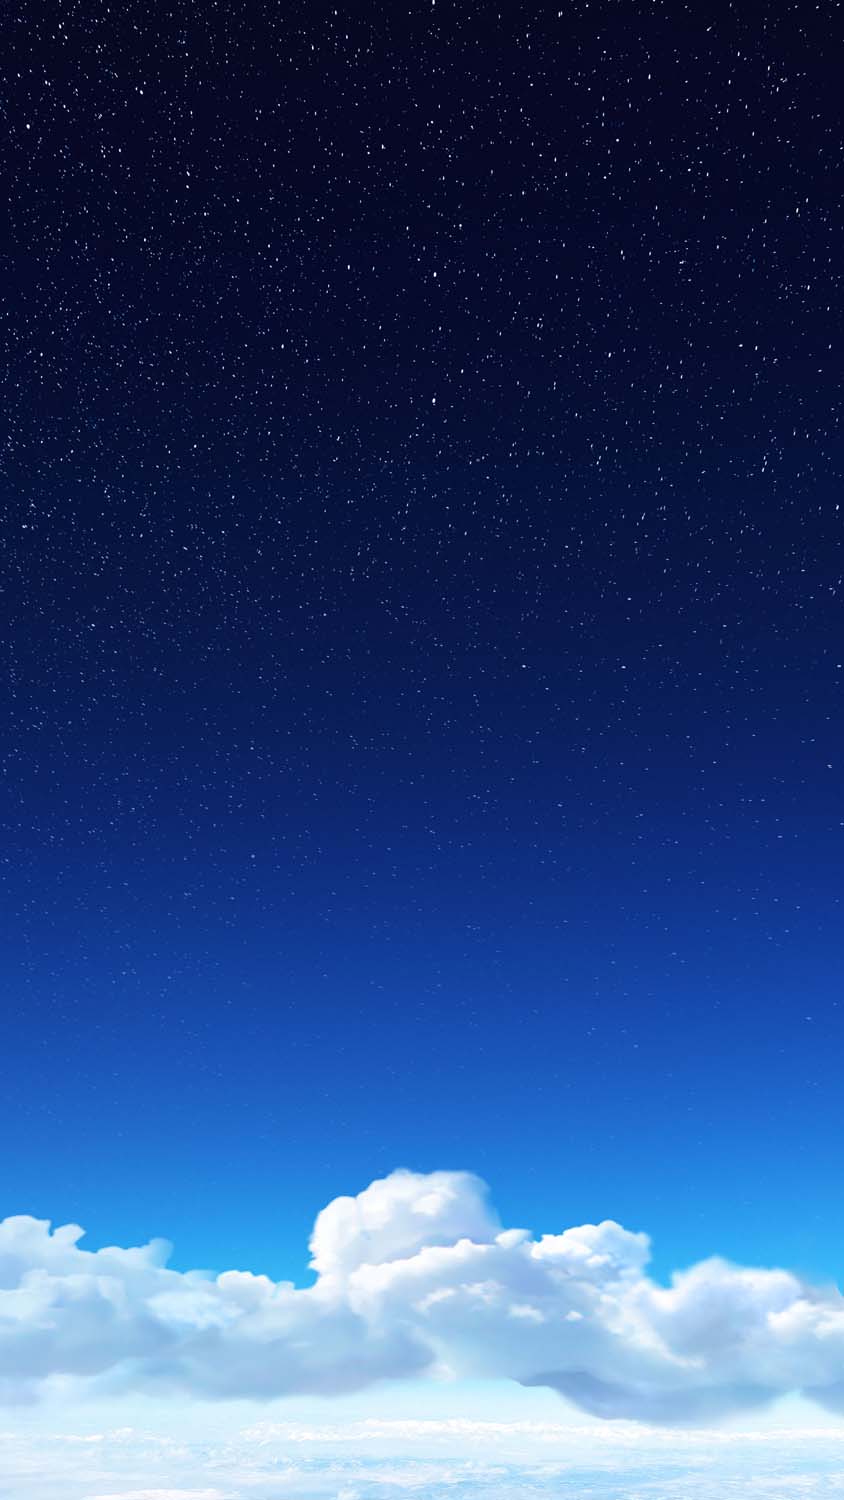 Anime Sky IPhone Wallpaper HD - IPhone Wallpapers : iPhone Wallpapers